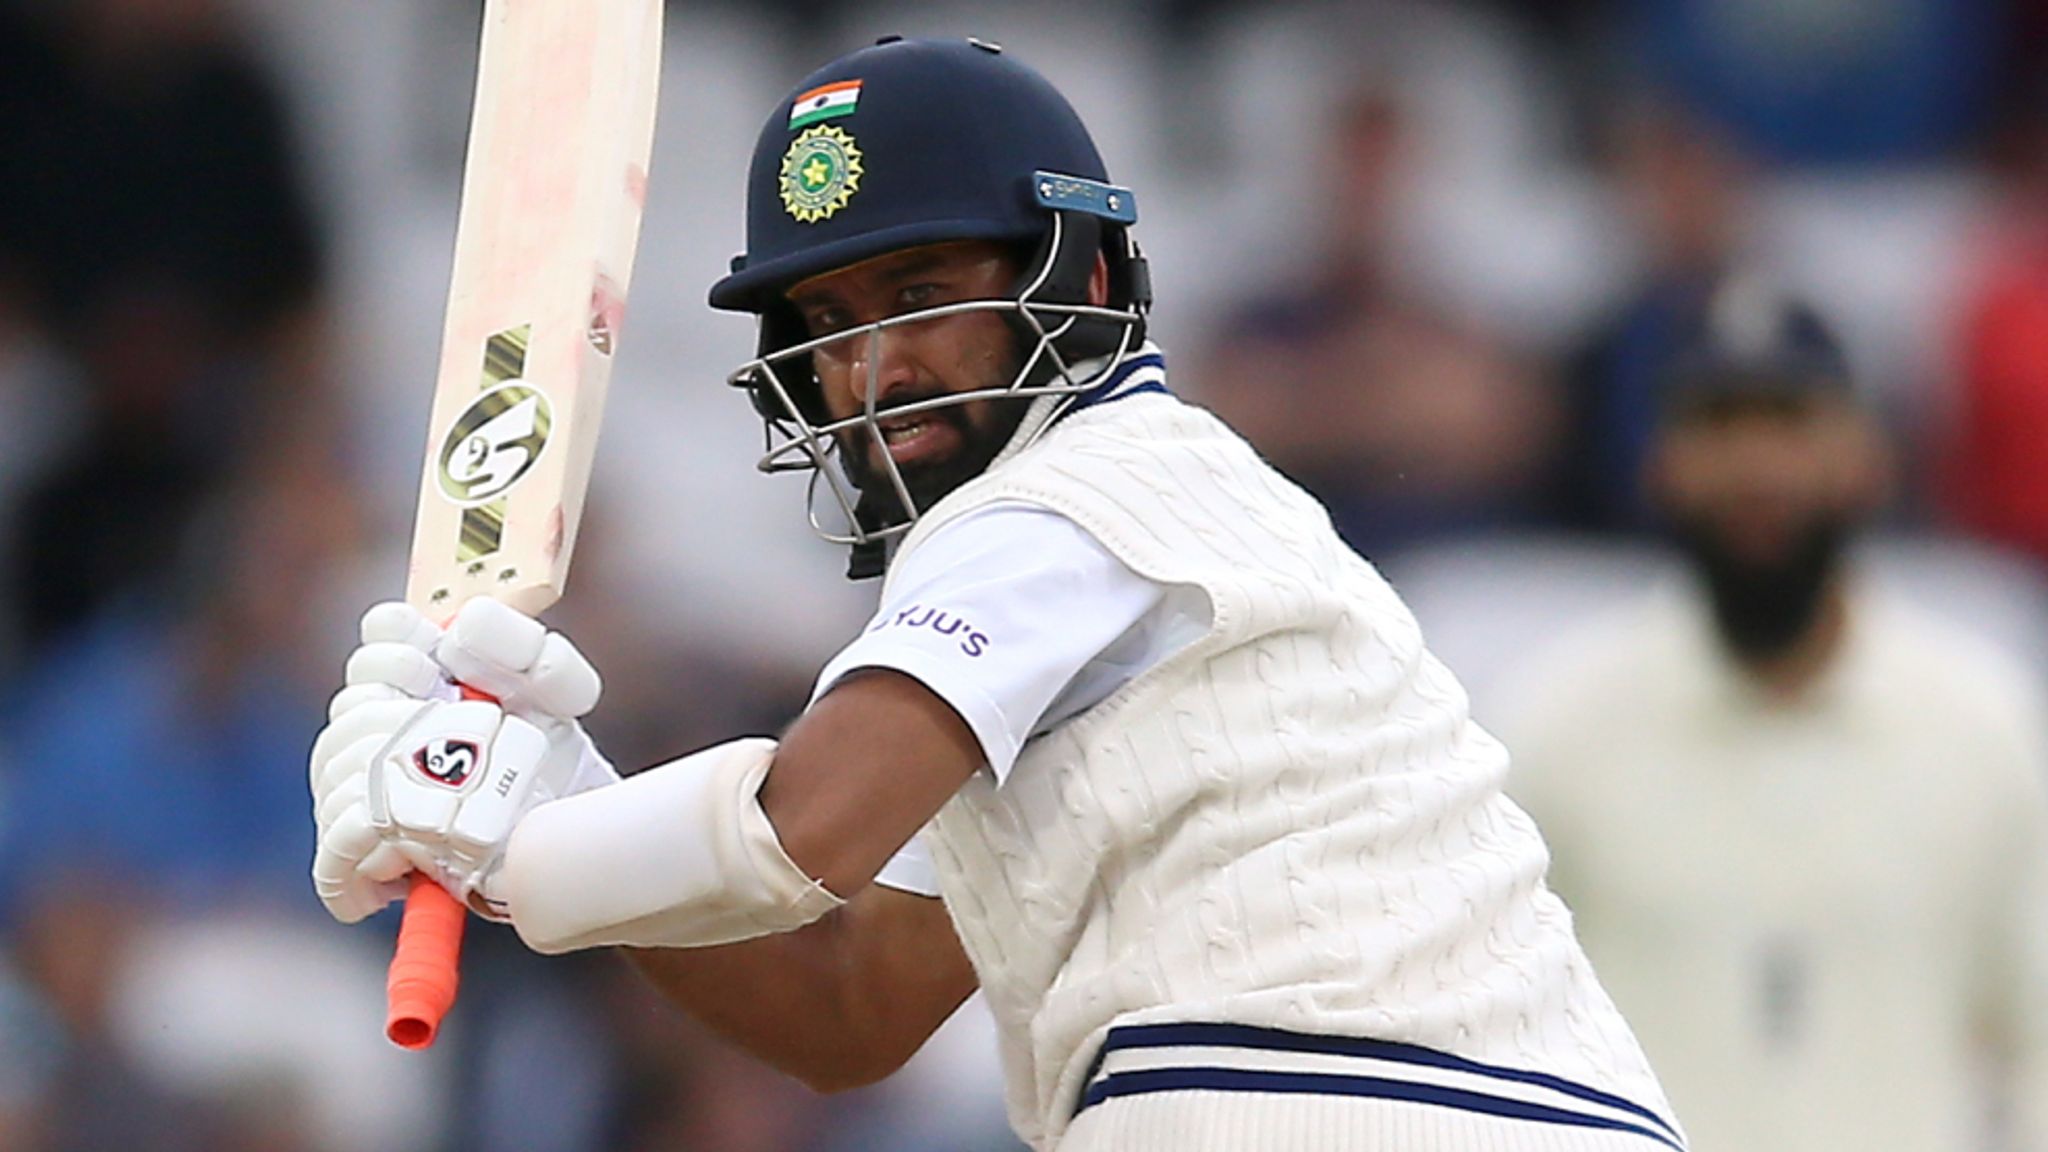 England frustrated by India on day three of third Test as Cheteshwar Pujara  found his form at Headingley | Cricket News | Sky Sports